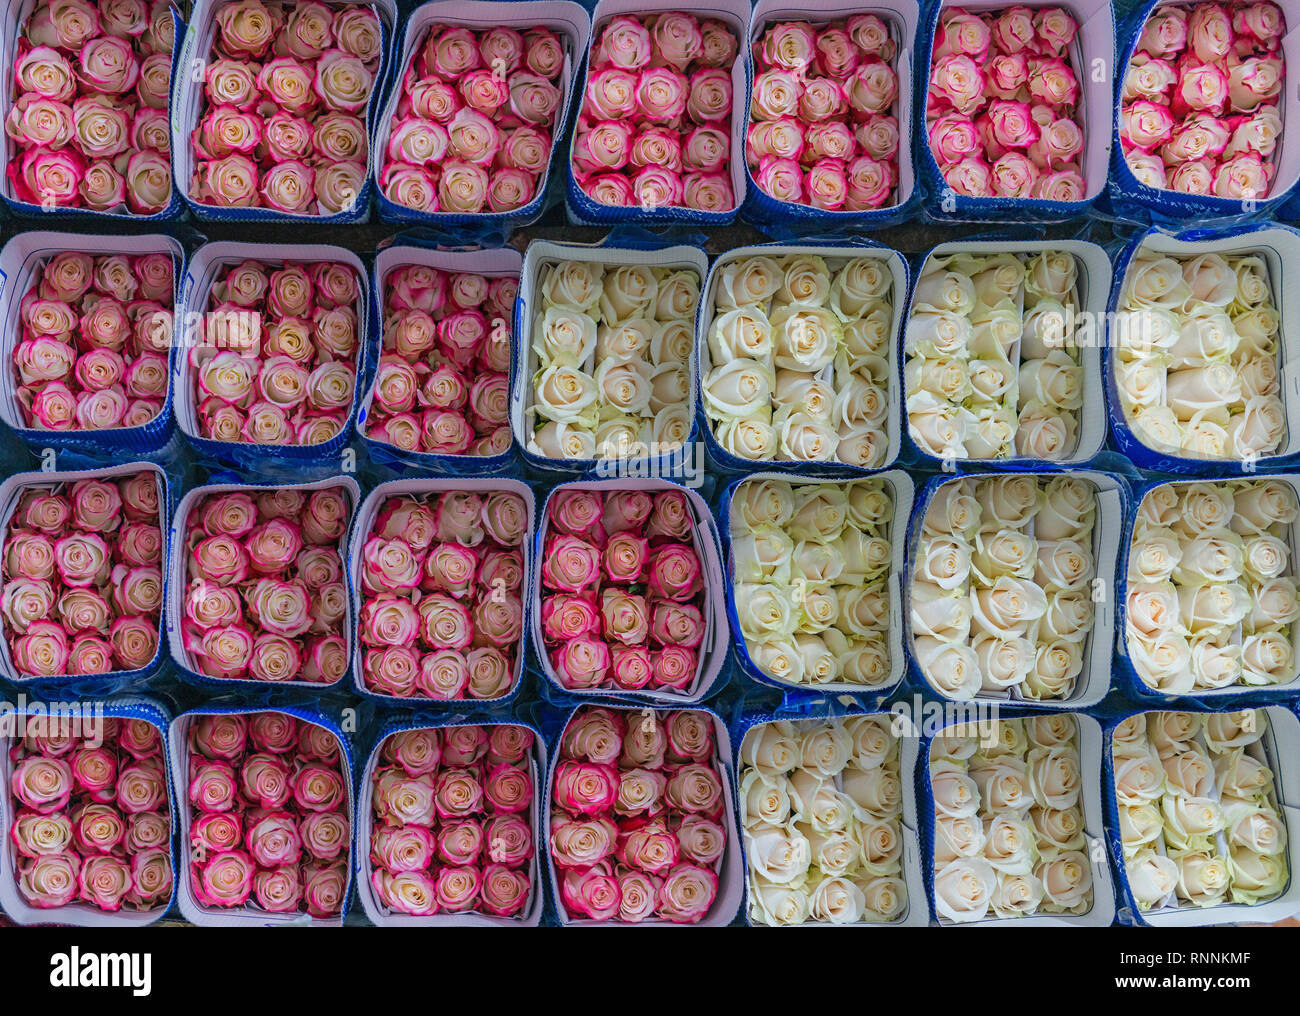 Dozens of pink and white roses ready to export to the global world economy in Cayambe, north of Quito, Ecuador. Stock Photo